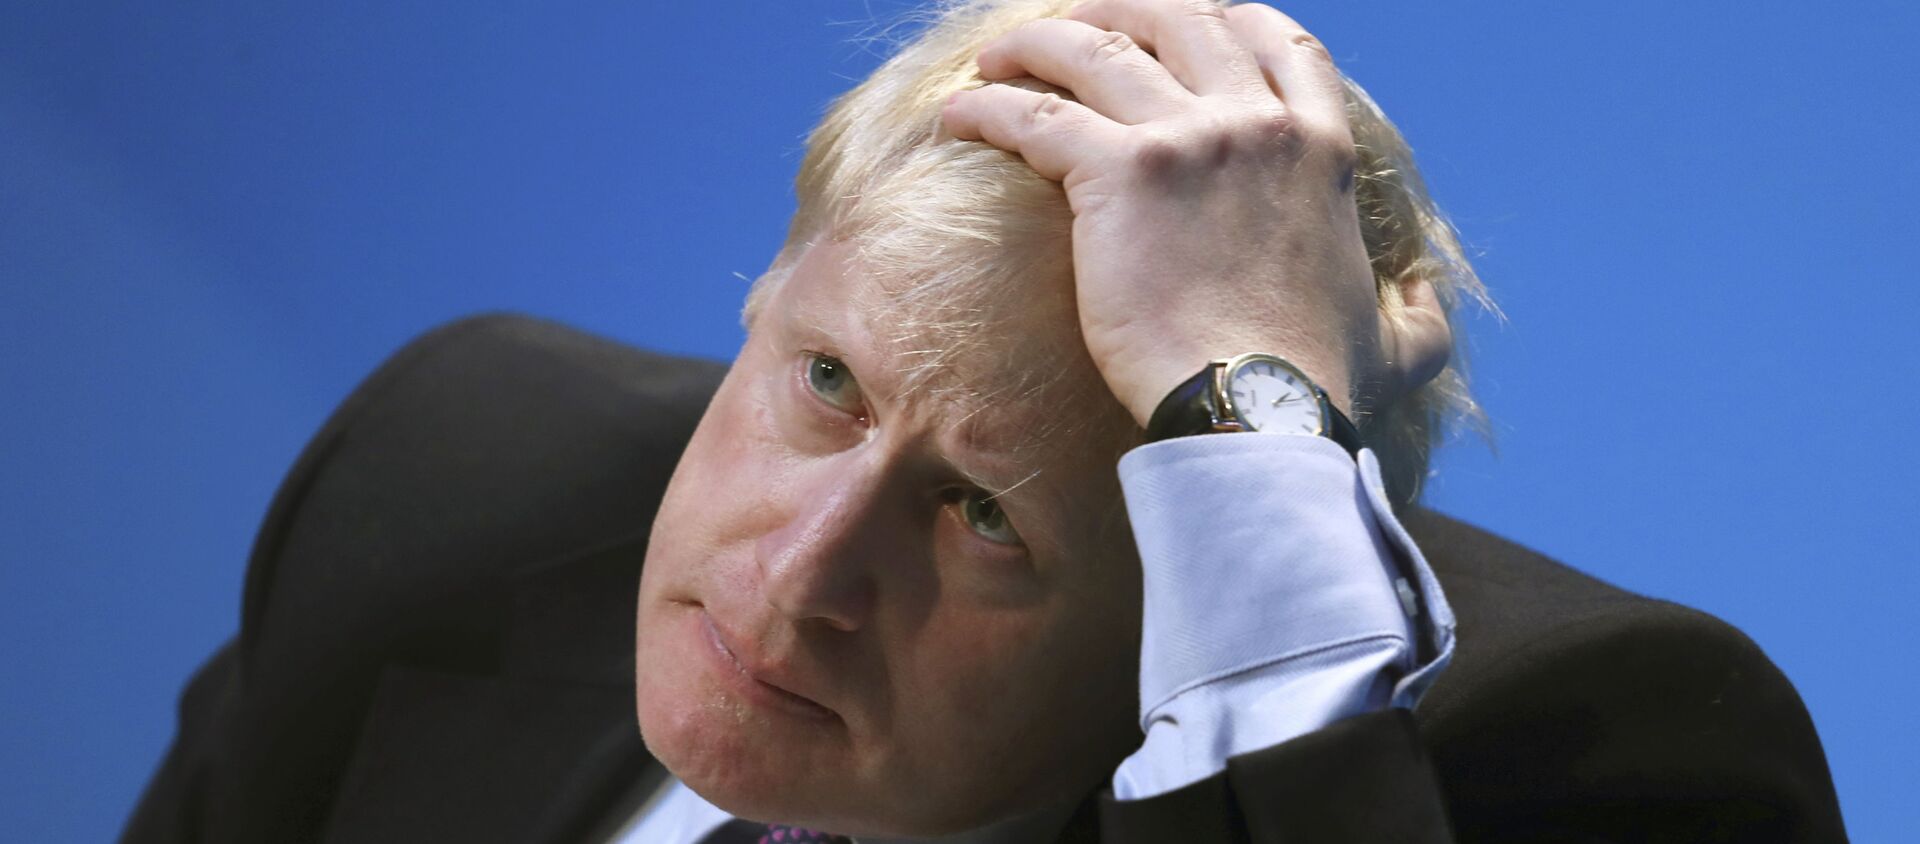 Britain's Conservative party leadership candidate Boris Johnson gestures during the first party hustings at the ICC in Birmingham, England, Saturday June 22, 2019 - Sputnik International, 1920, 15.03.2021